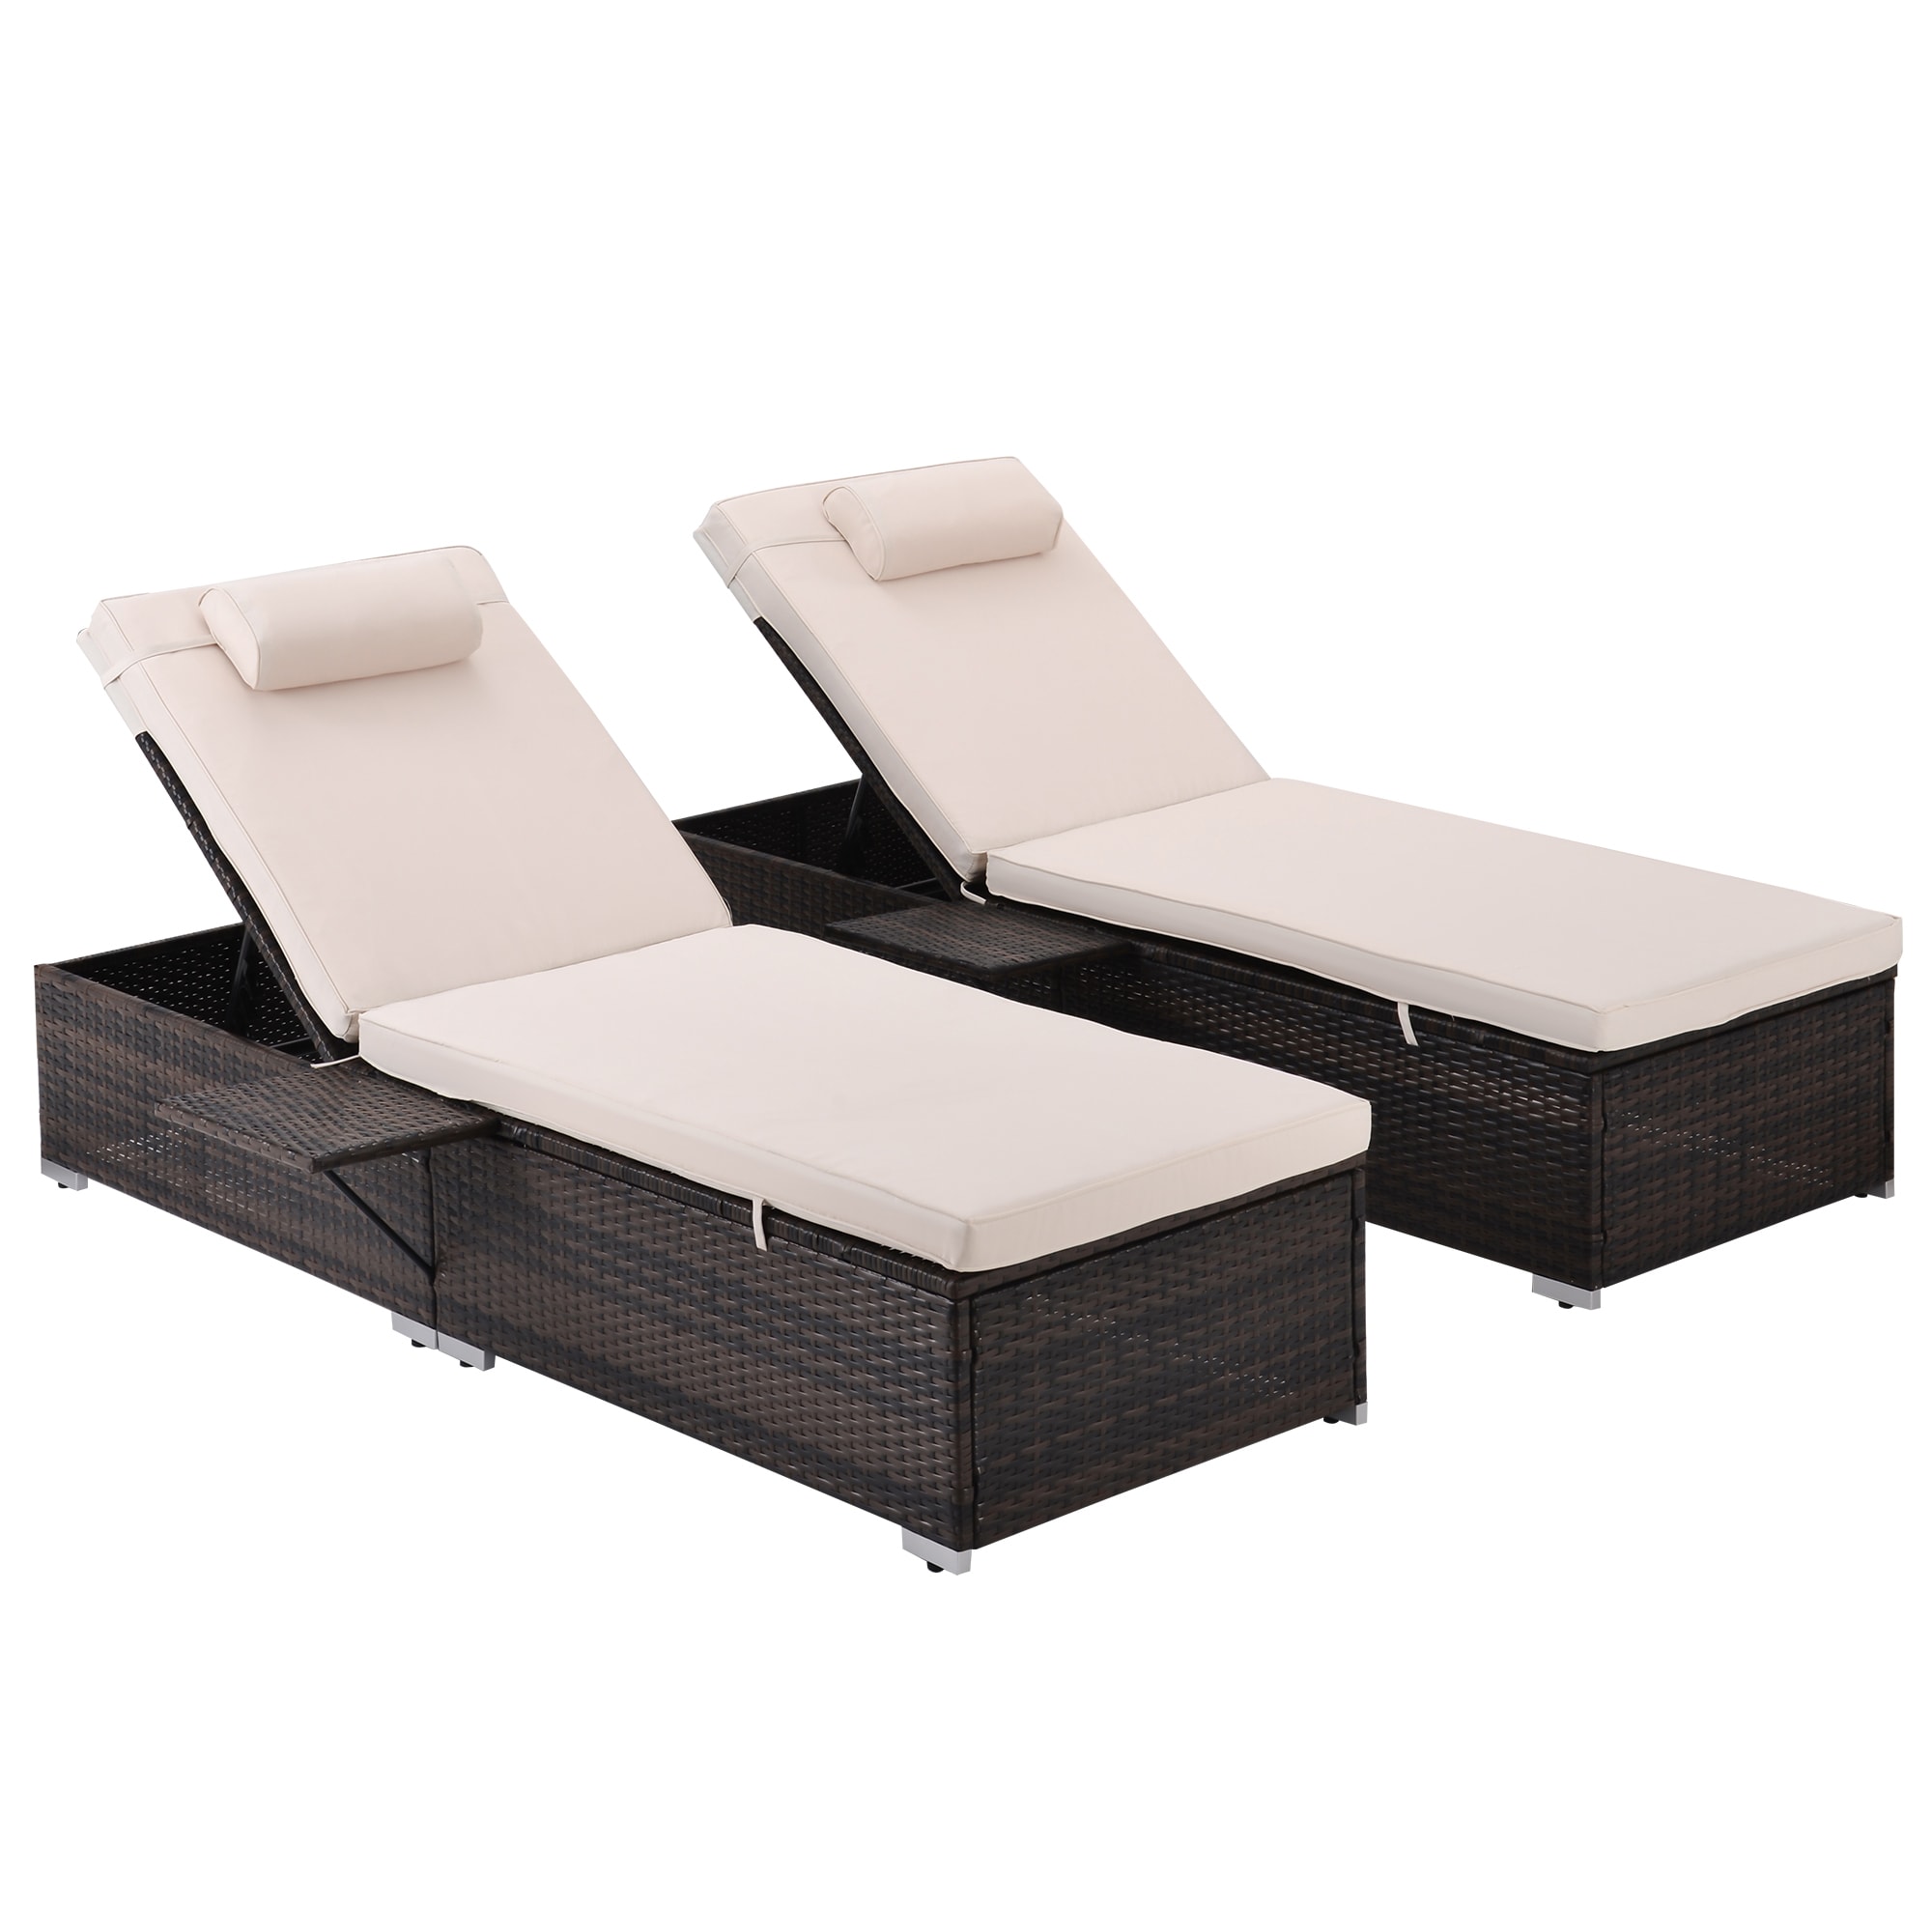 Clihome 2 Piece Wicker Patio Chaise Lounge Set Of 2 Rattan Wood Frame Chaise  Lounge Chair(S) With White Cushioned Seat In The Patio Chairs Department At  Lowes.Com